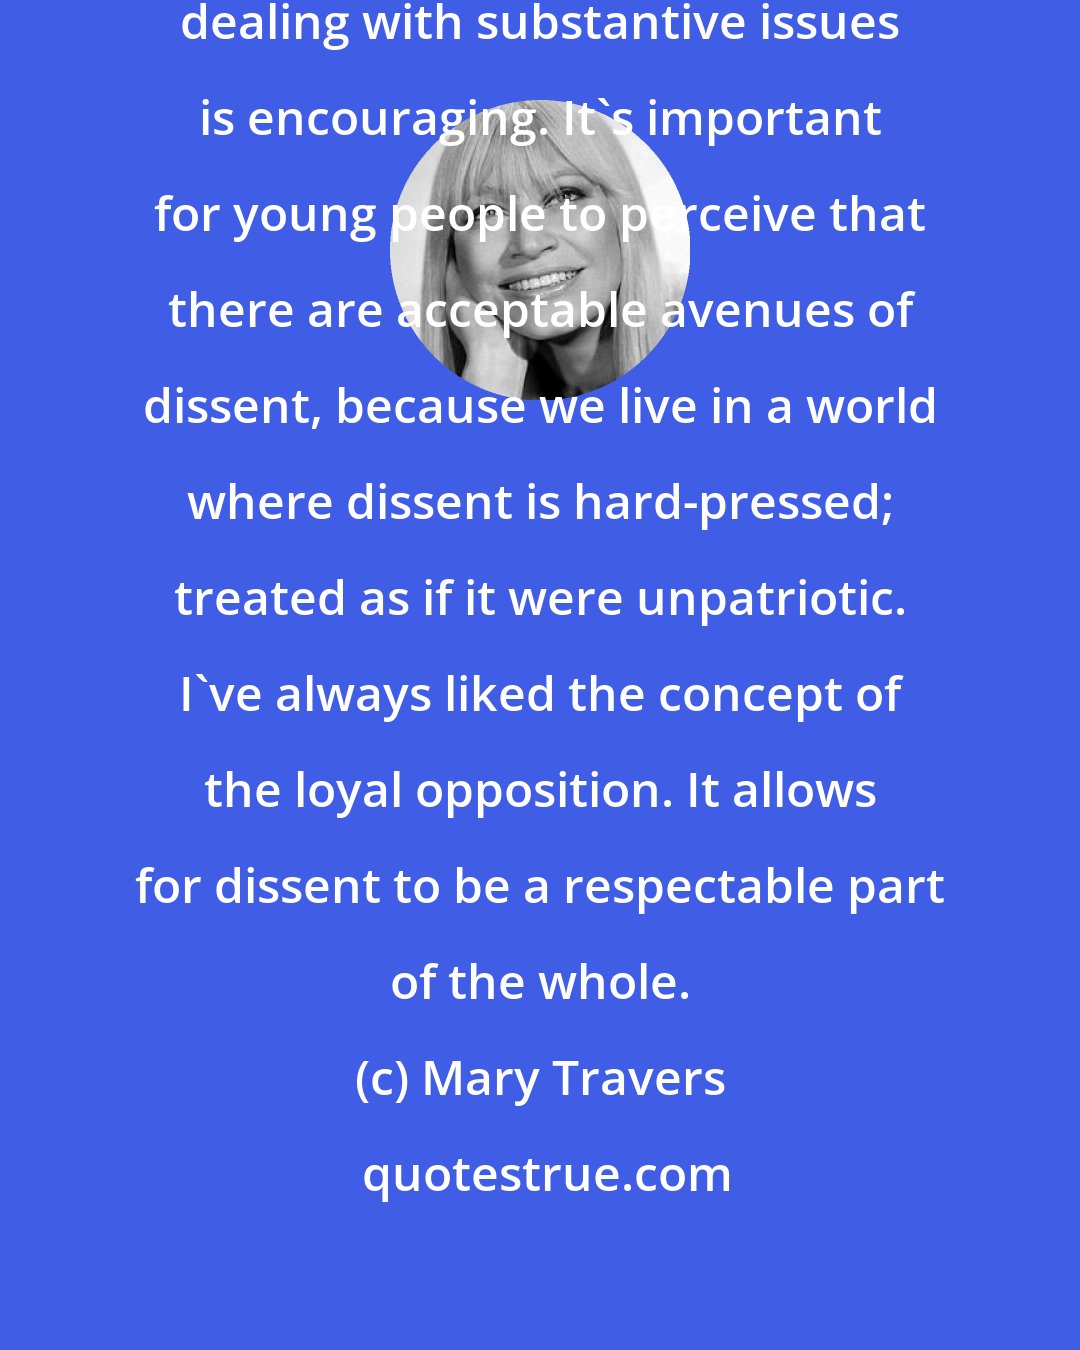 Mary Travers: The fact that there are singer-songwriters dealing with substantive issues is encouraging. It's important for young people to perceive that there are acceptable avenues of dissent, because we live in a world where dissent is hard-pressed; treated as if it were unpatriotic. I've always liked the concept of the loyal opposition. It allows for dissent to be a respectable part of the whole.